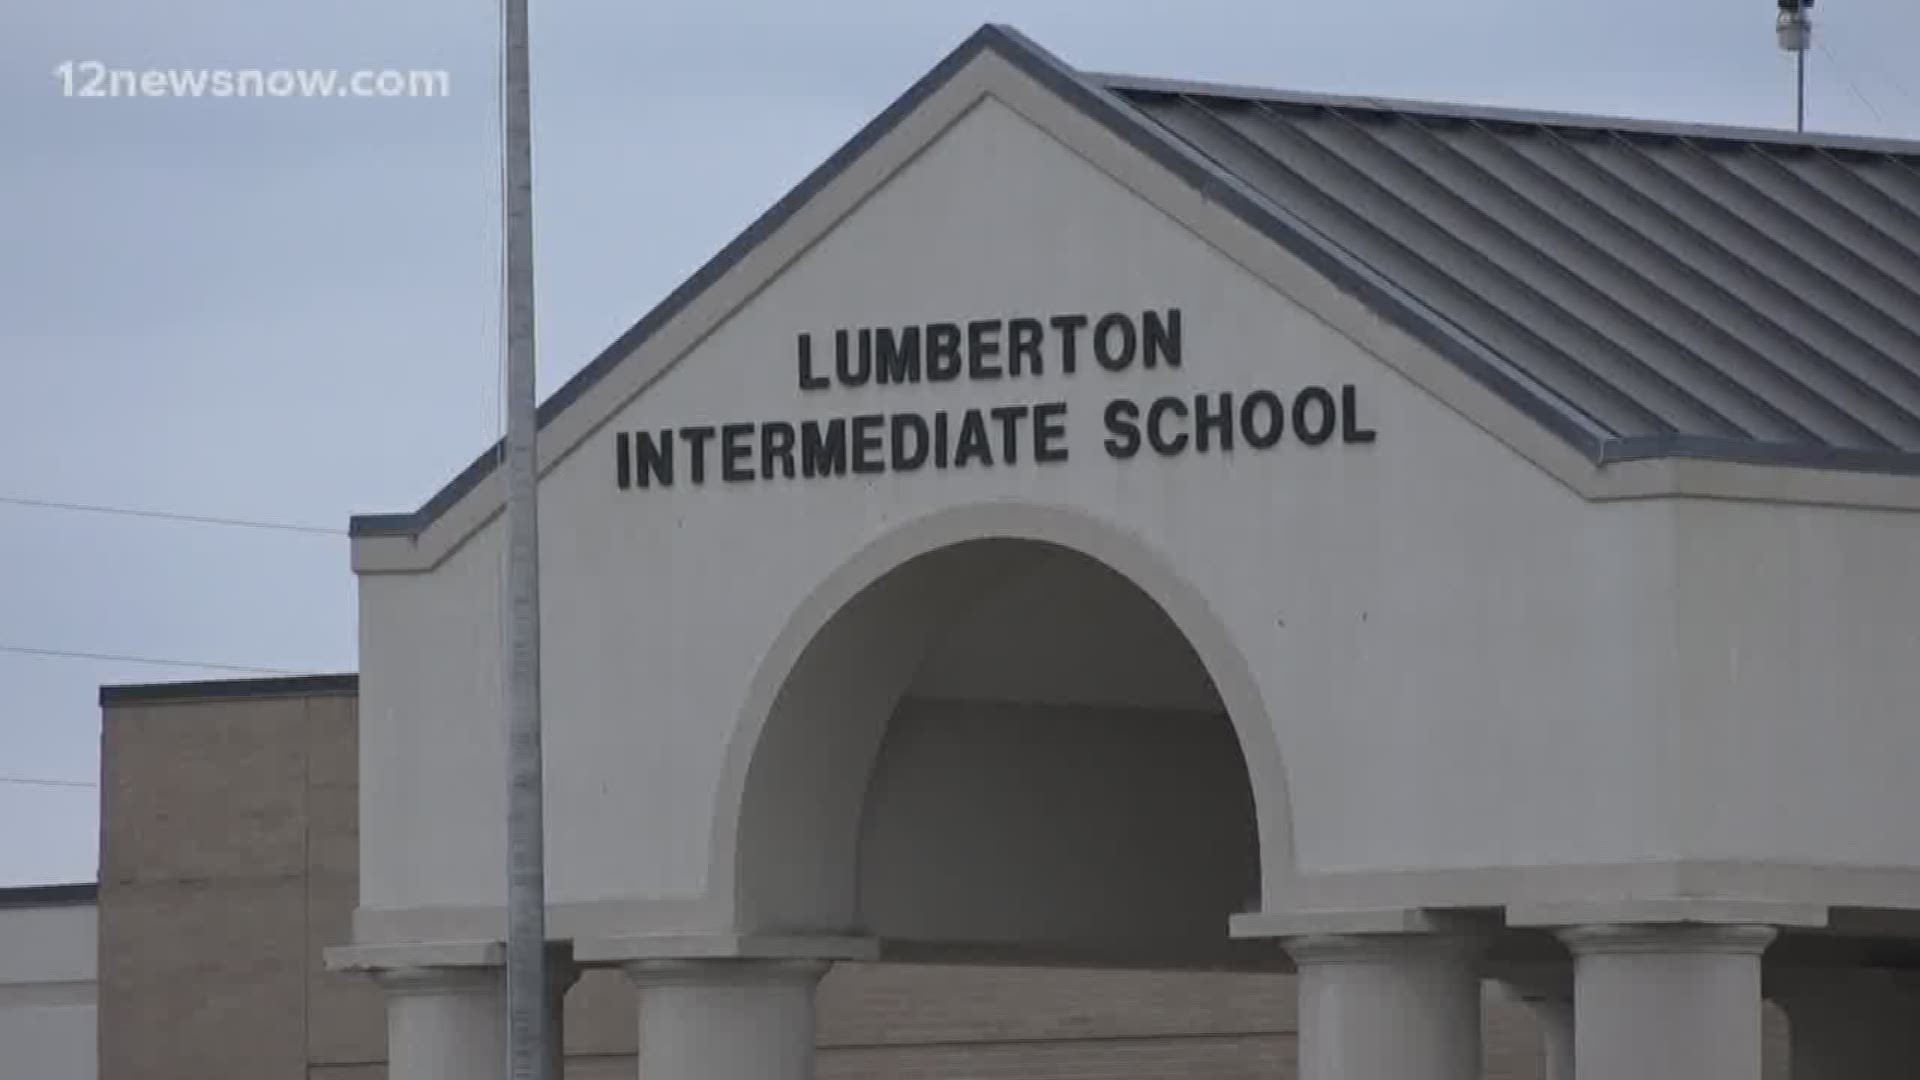 A petition to install recess for children at Lumberton Intermediate has received more than 1,100 signatures.